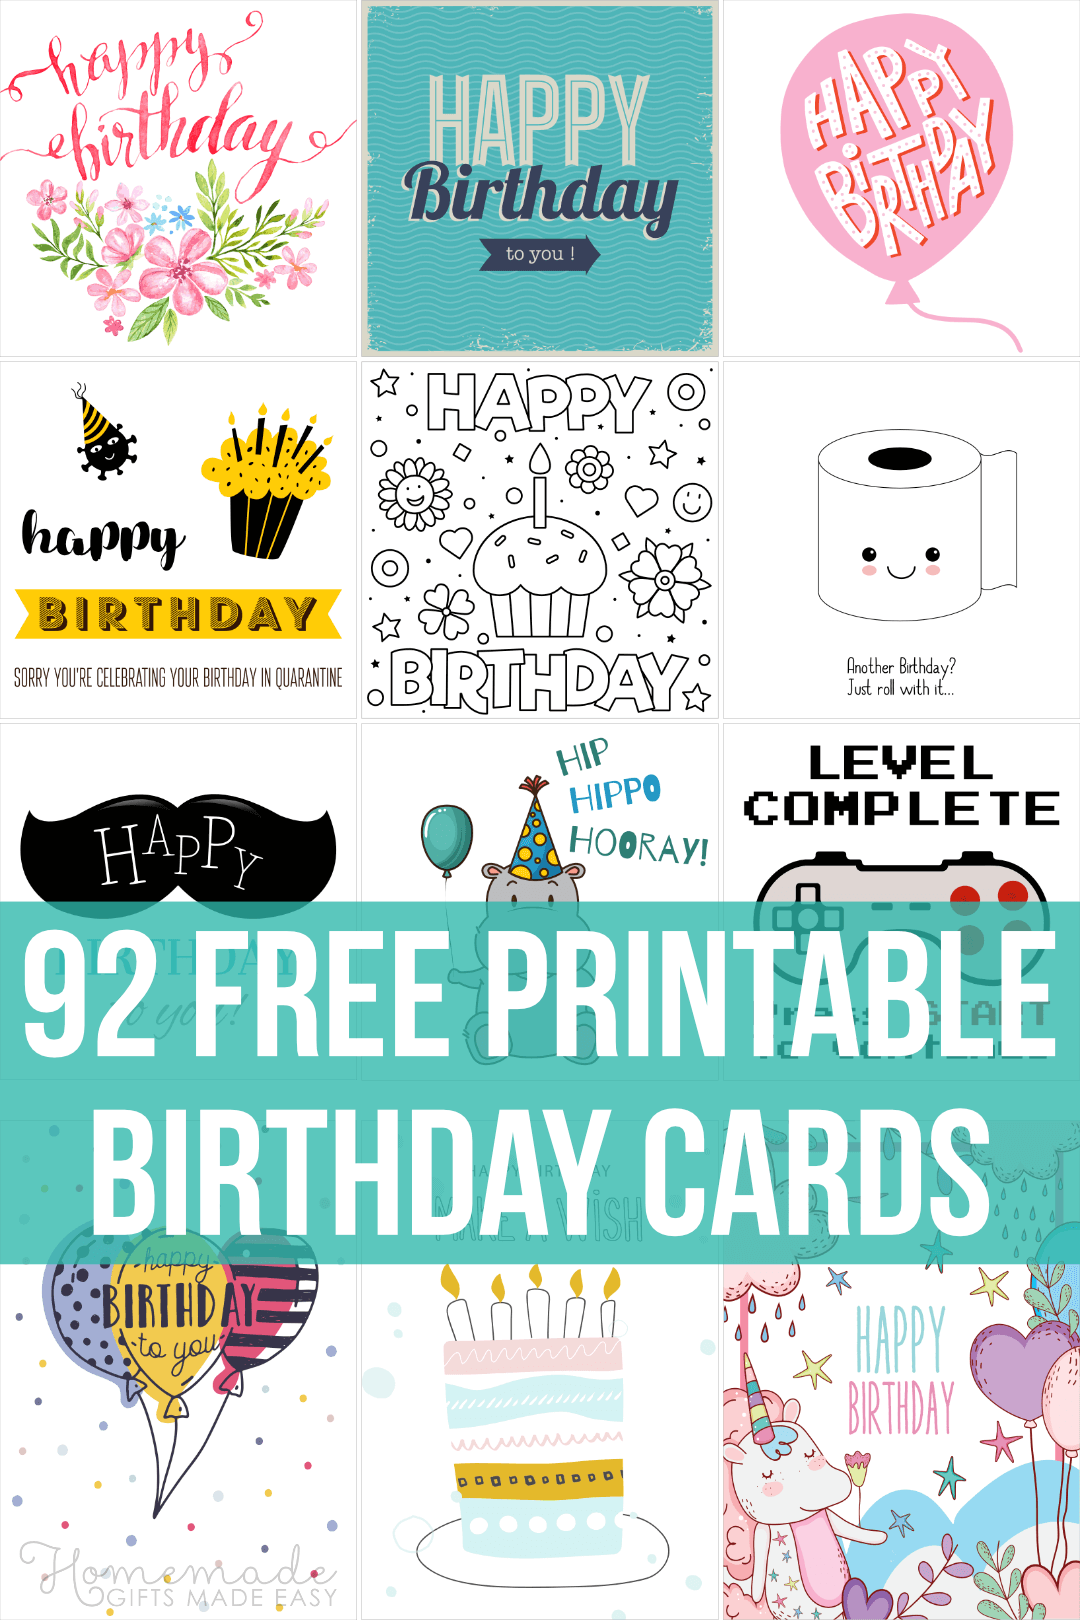 22 Free Printable Birthday Cards For Him, Her, Kids and Adults With Free Templates For Cards Print